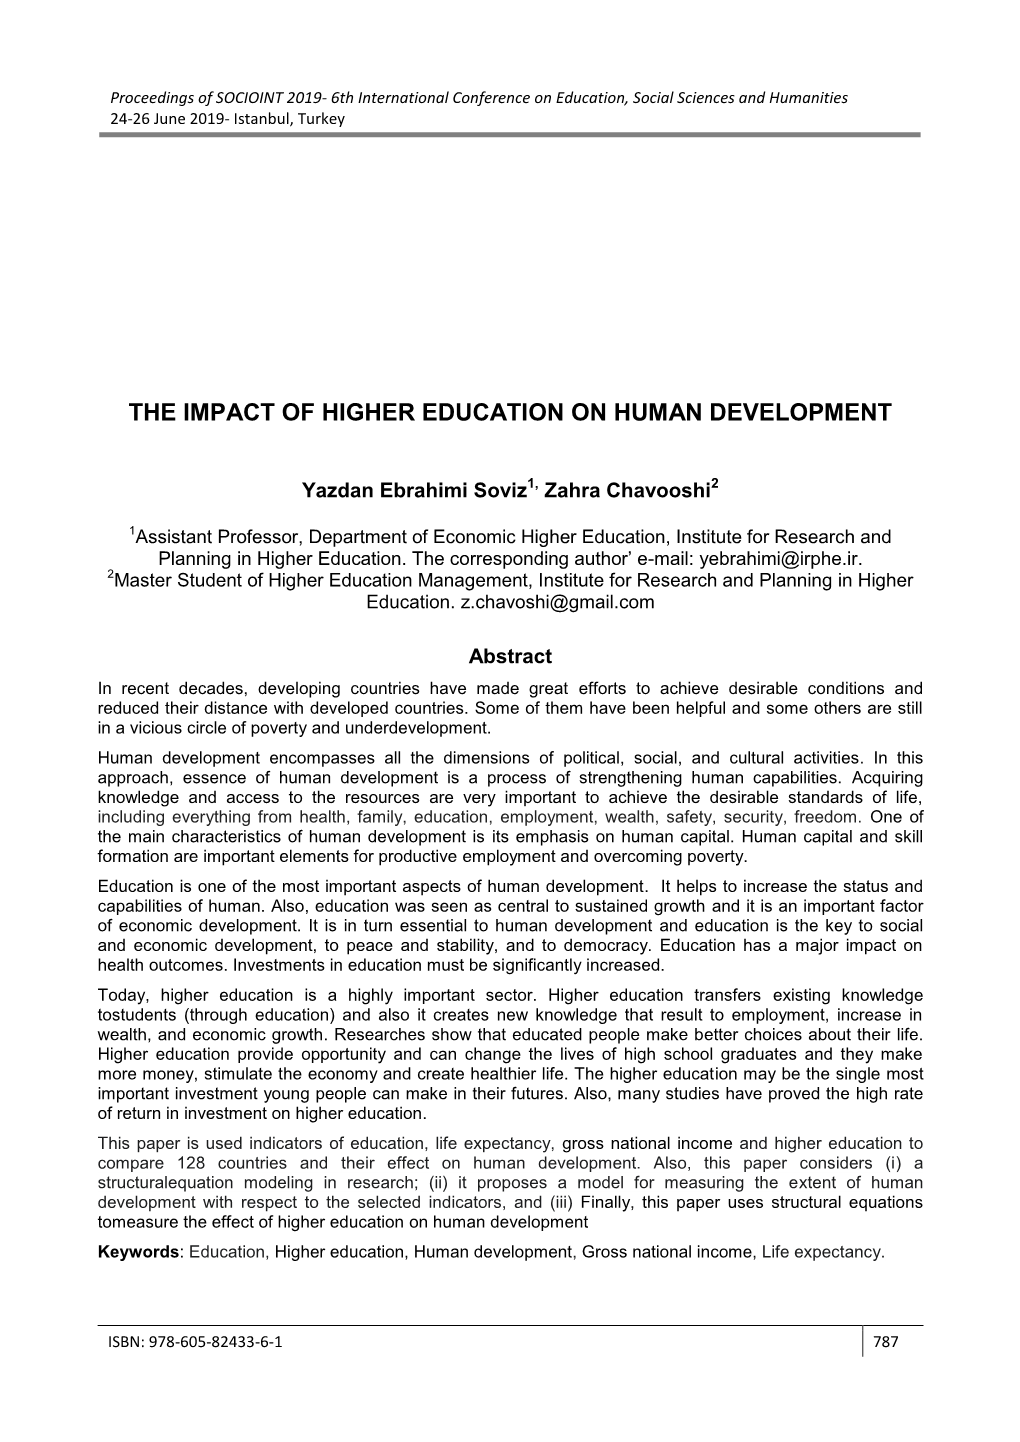 The Impact of Higher Education on Human Development